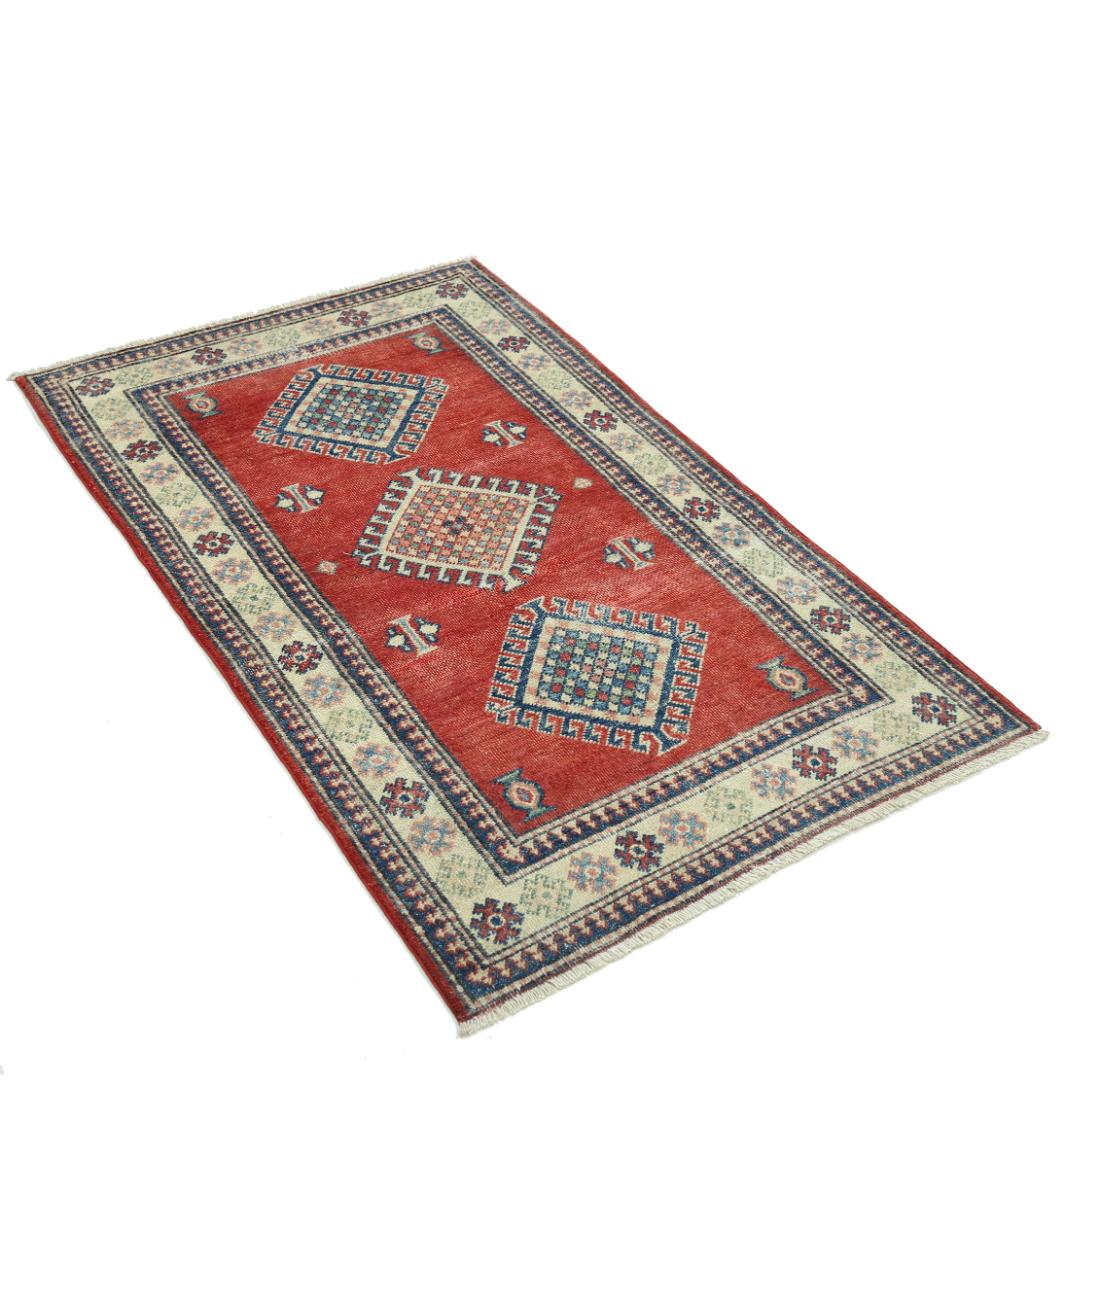 Hand Knotted Tribal Kazak Wool Rug - 2'10'' x 4'10'' 2' 10" X 4' 10" (86 X 147) / Red / Ivory